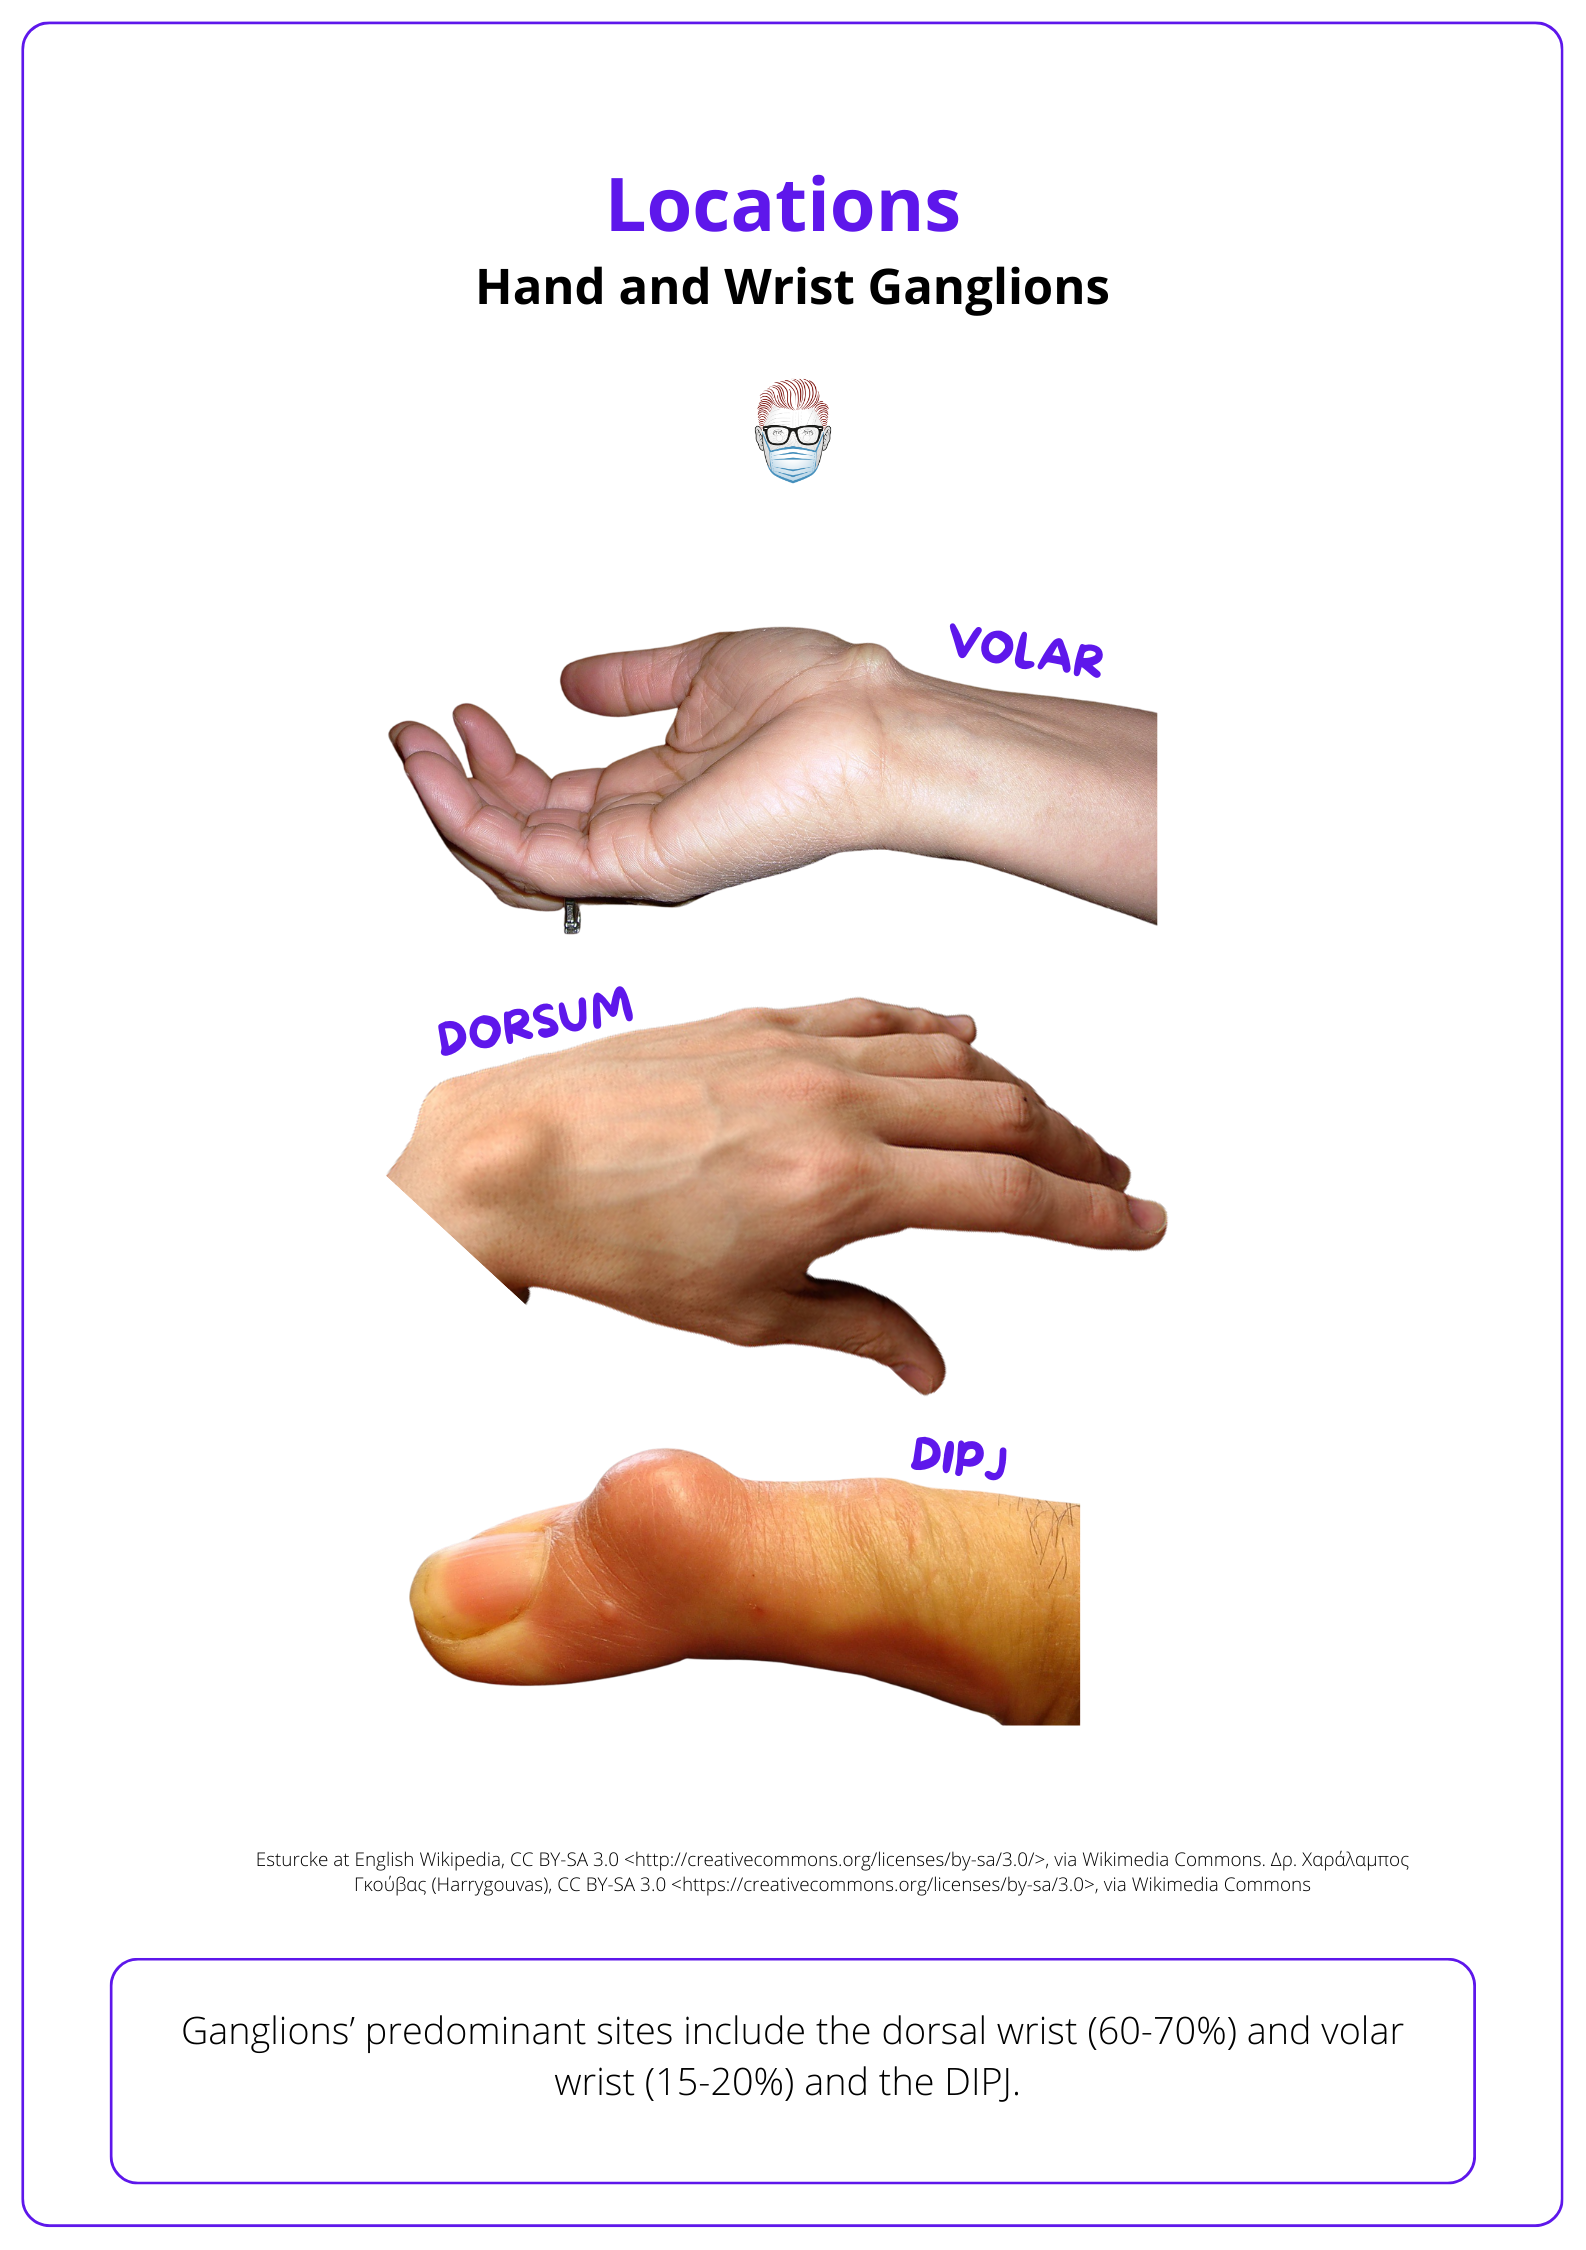 This image shows the locations of Ganglion Cysts or different types of Ganglion Cysts